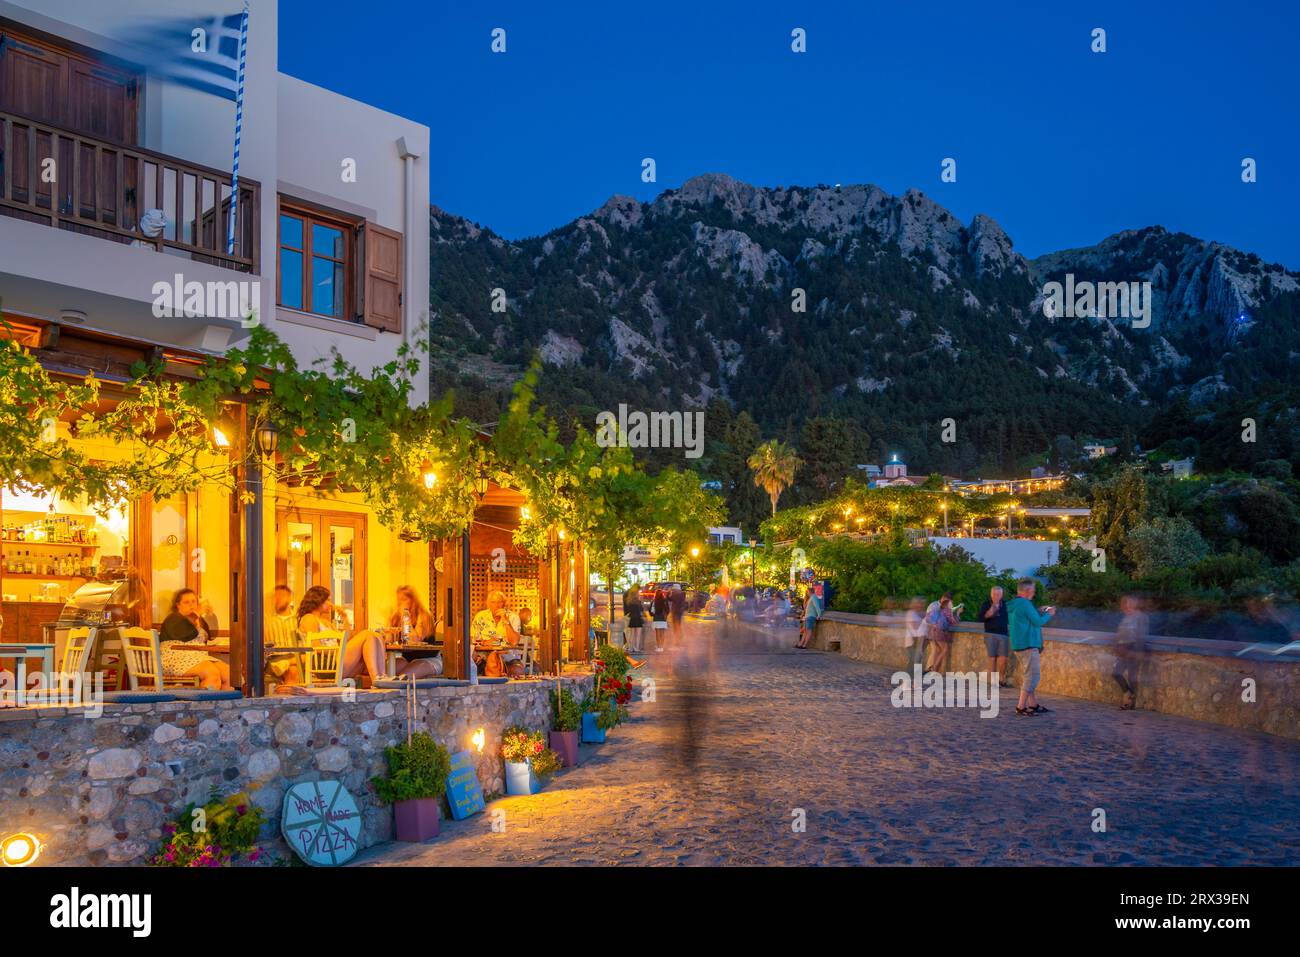 View of restaurant in Zia Sunset View at dusk, Zia Village, Kos Town, Kos, Dodecanese, Greek Islands, Greece, Europe Stock Photo